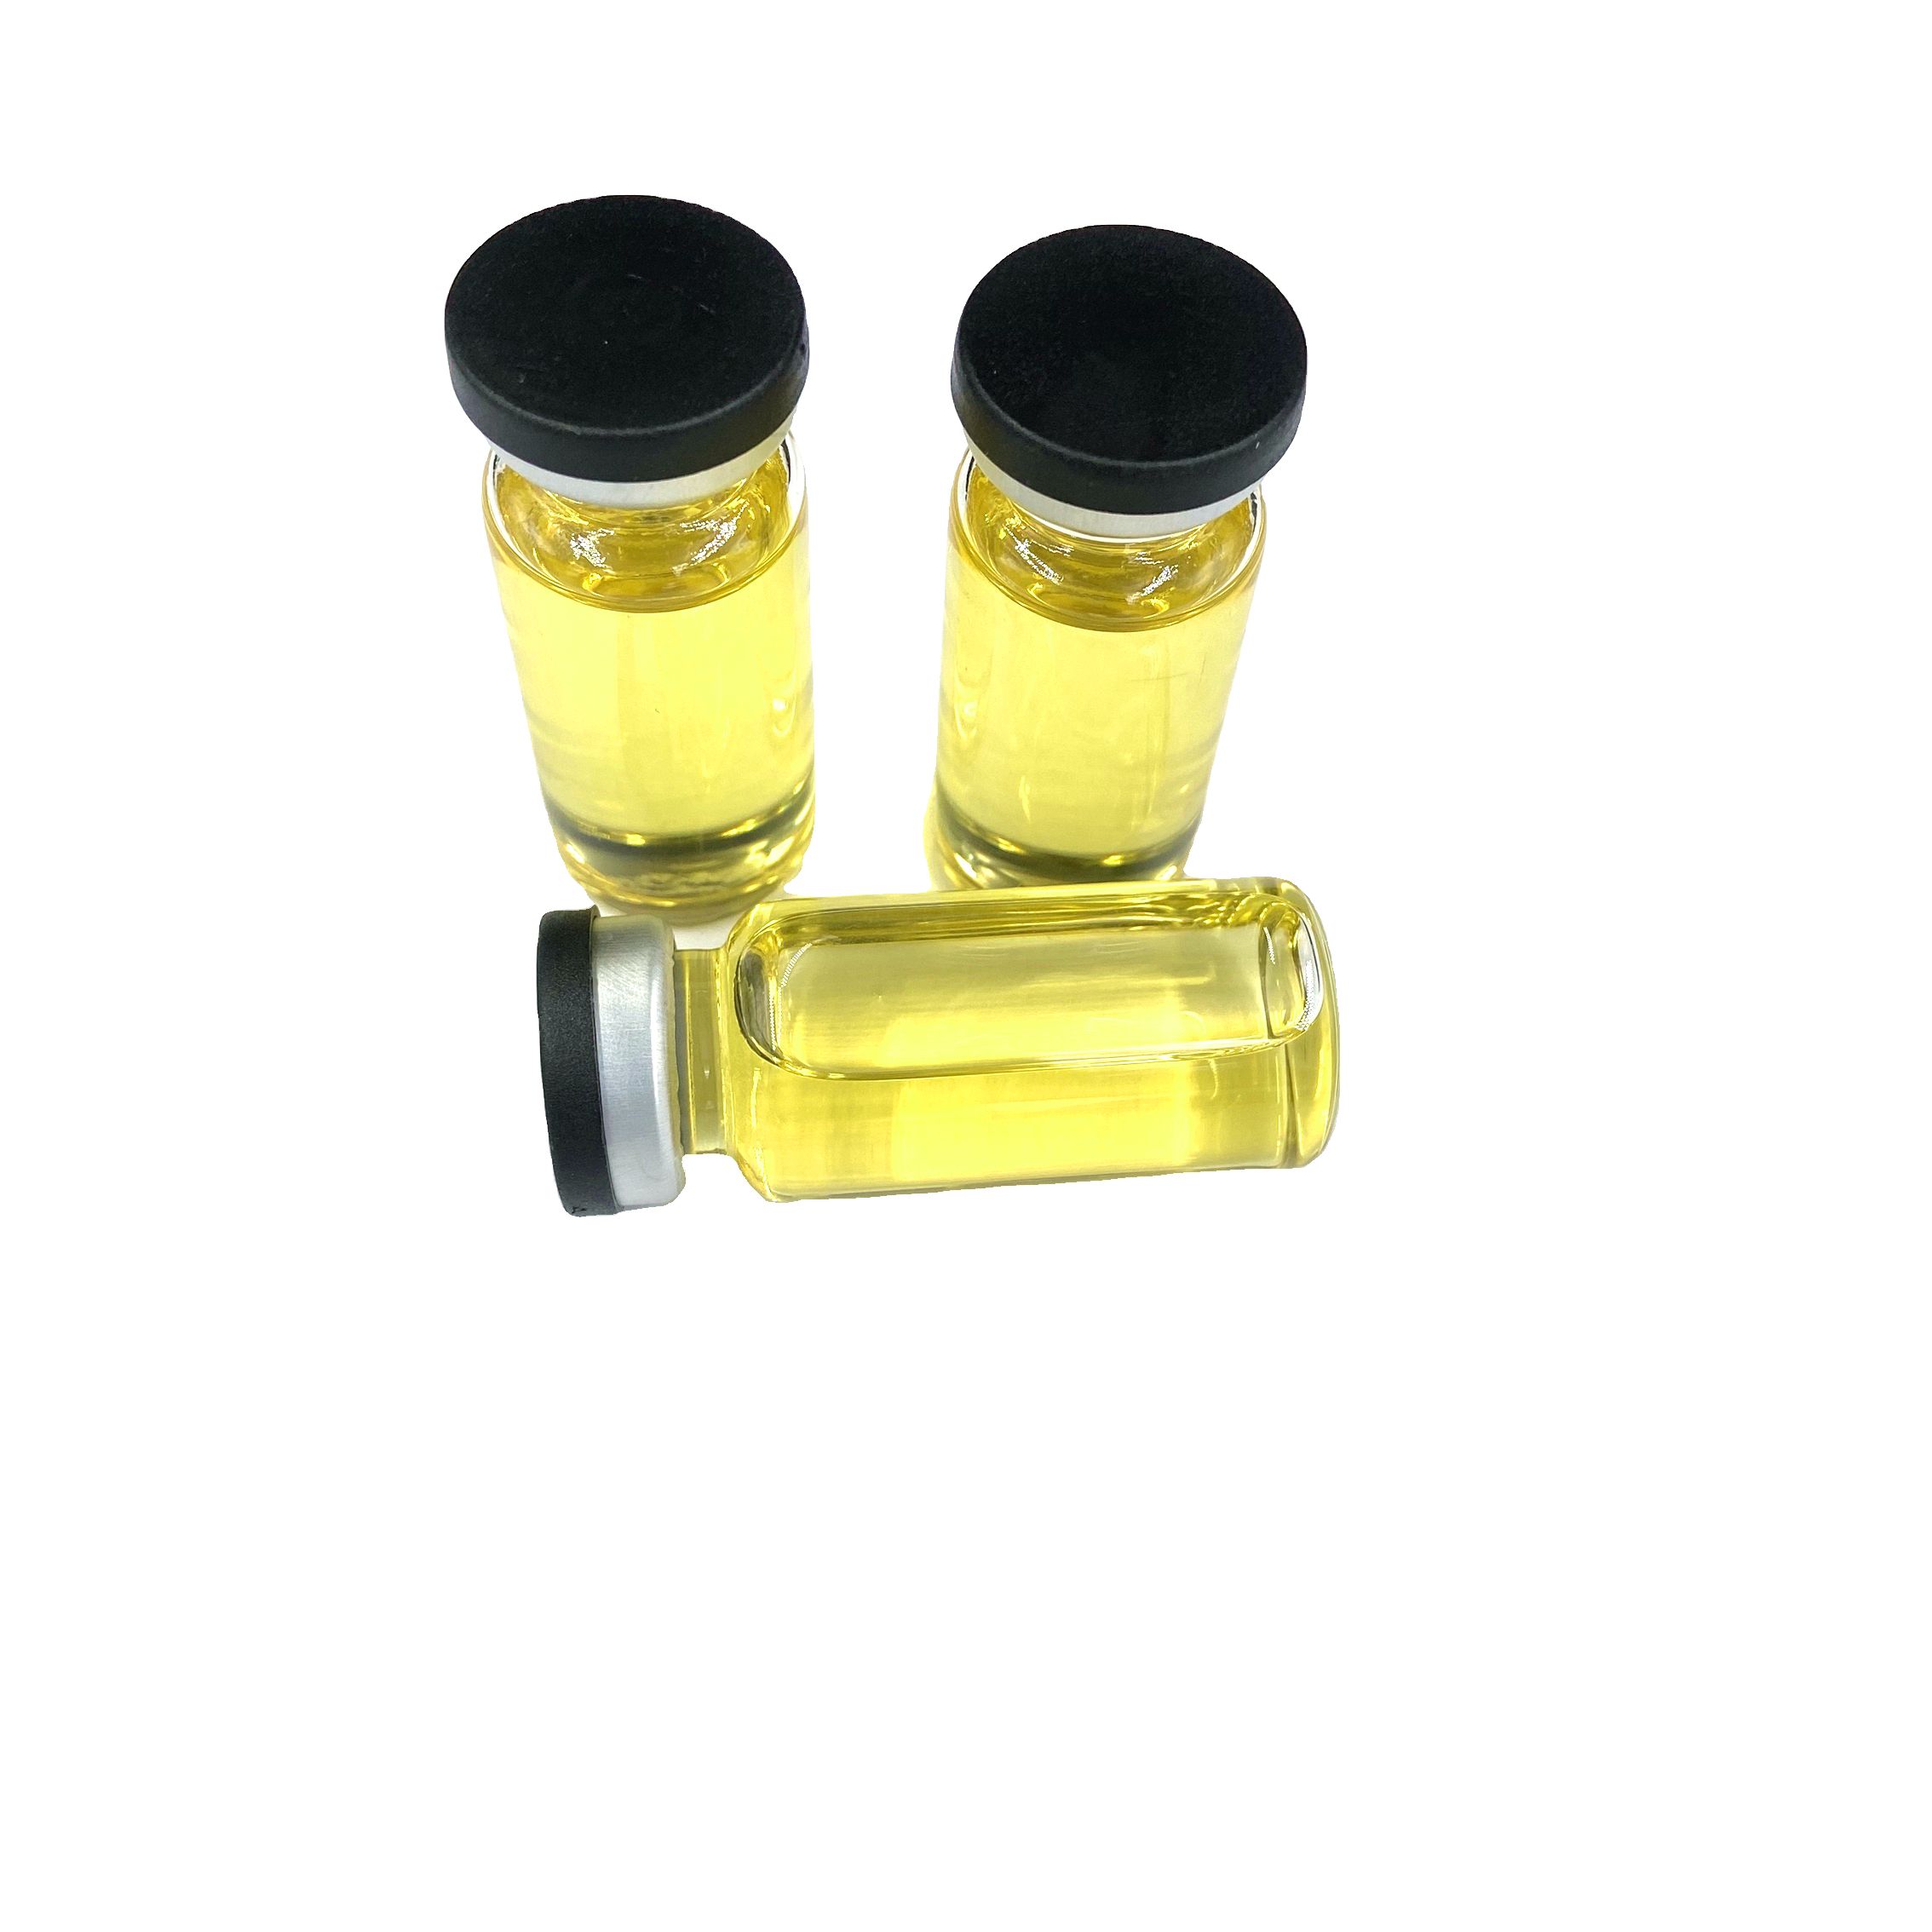 TREN-A Trenbolone Acetate 150mg Injectables 10ml